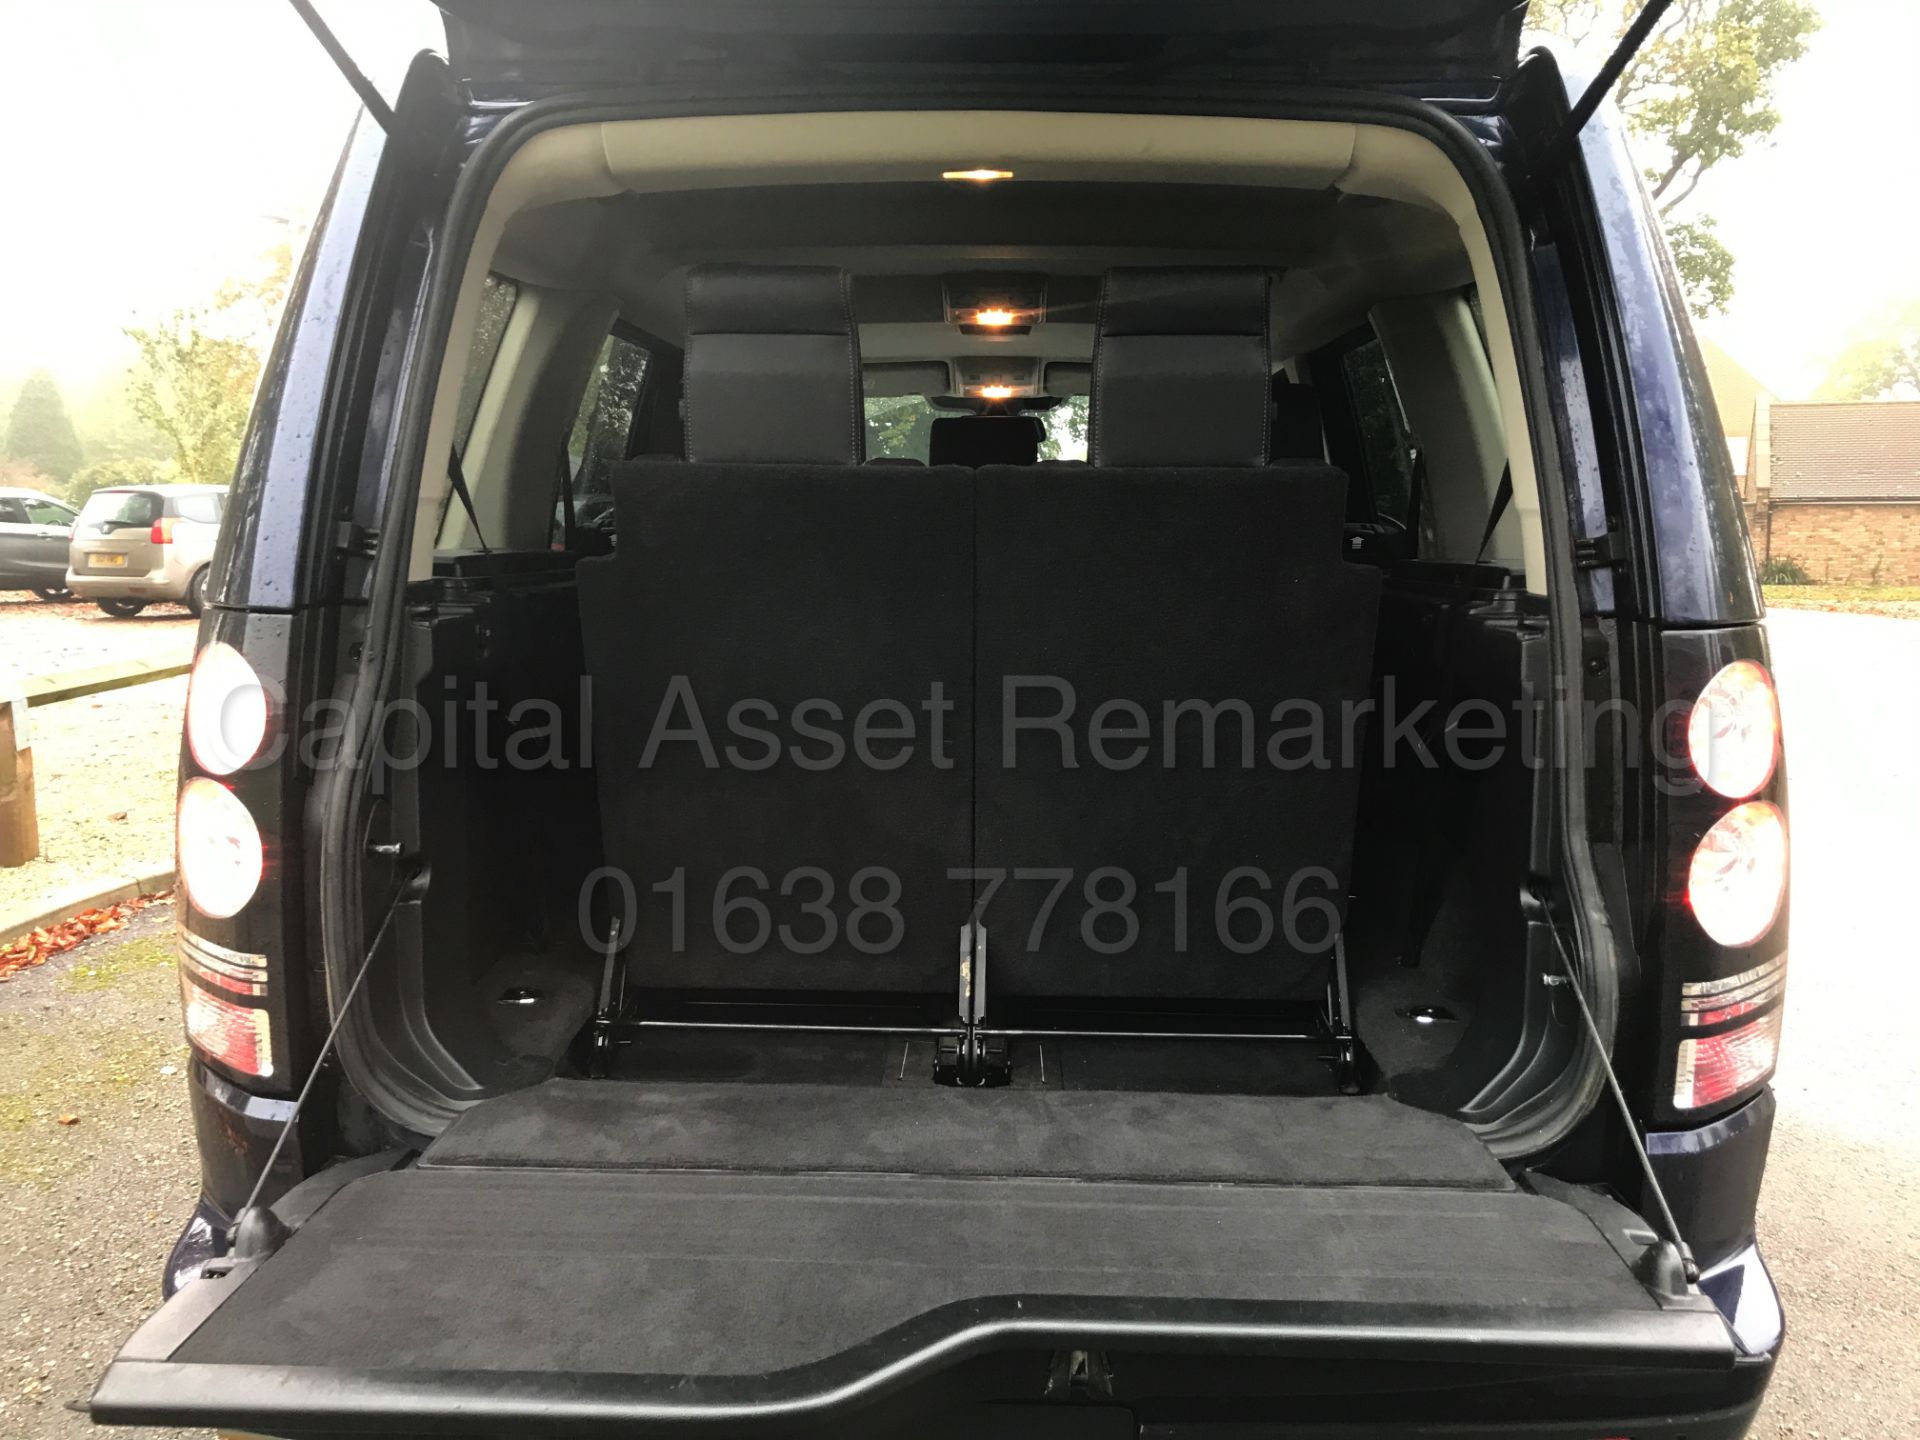 ON SALE LAND ROVER DISCOVERY 4 (2014) '3.0 SDV6 - 8 SPEED AUTO - LEATHER - SAT NAV -7 SEATER'1 OWNER - Image 21 of 41